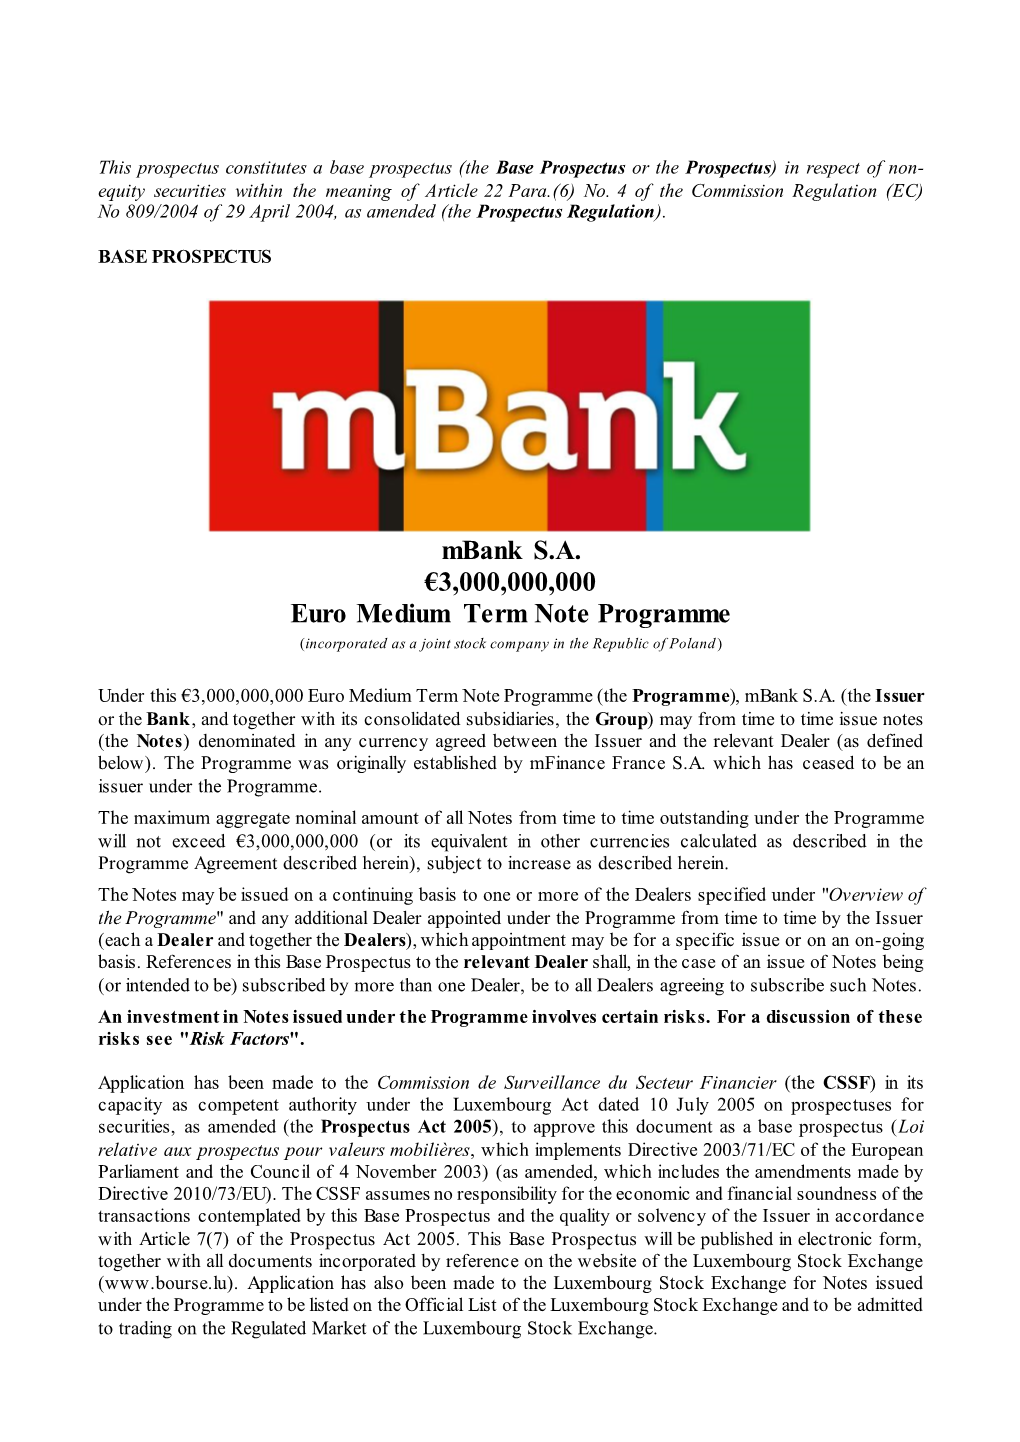 Mbank S.A. €3,000,000,000 Euro Medium Term Note Programme (Incorporated As a Joint Stock Company in the Republic of Poland)